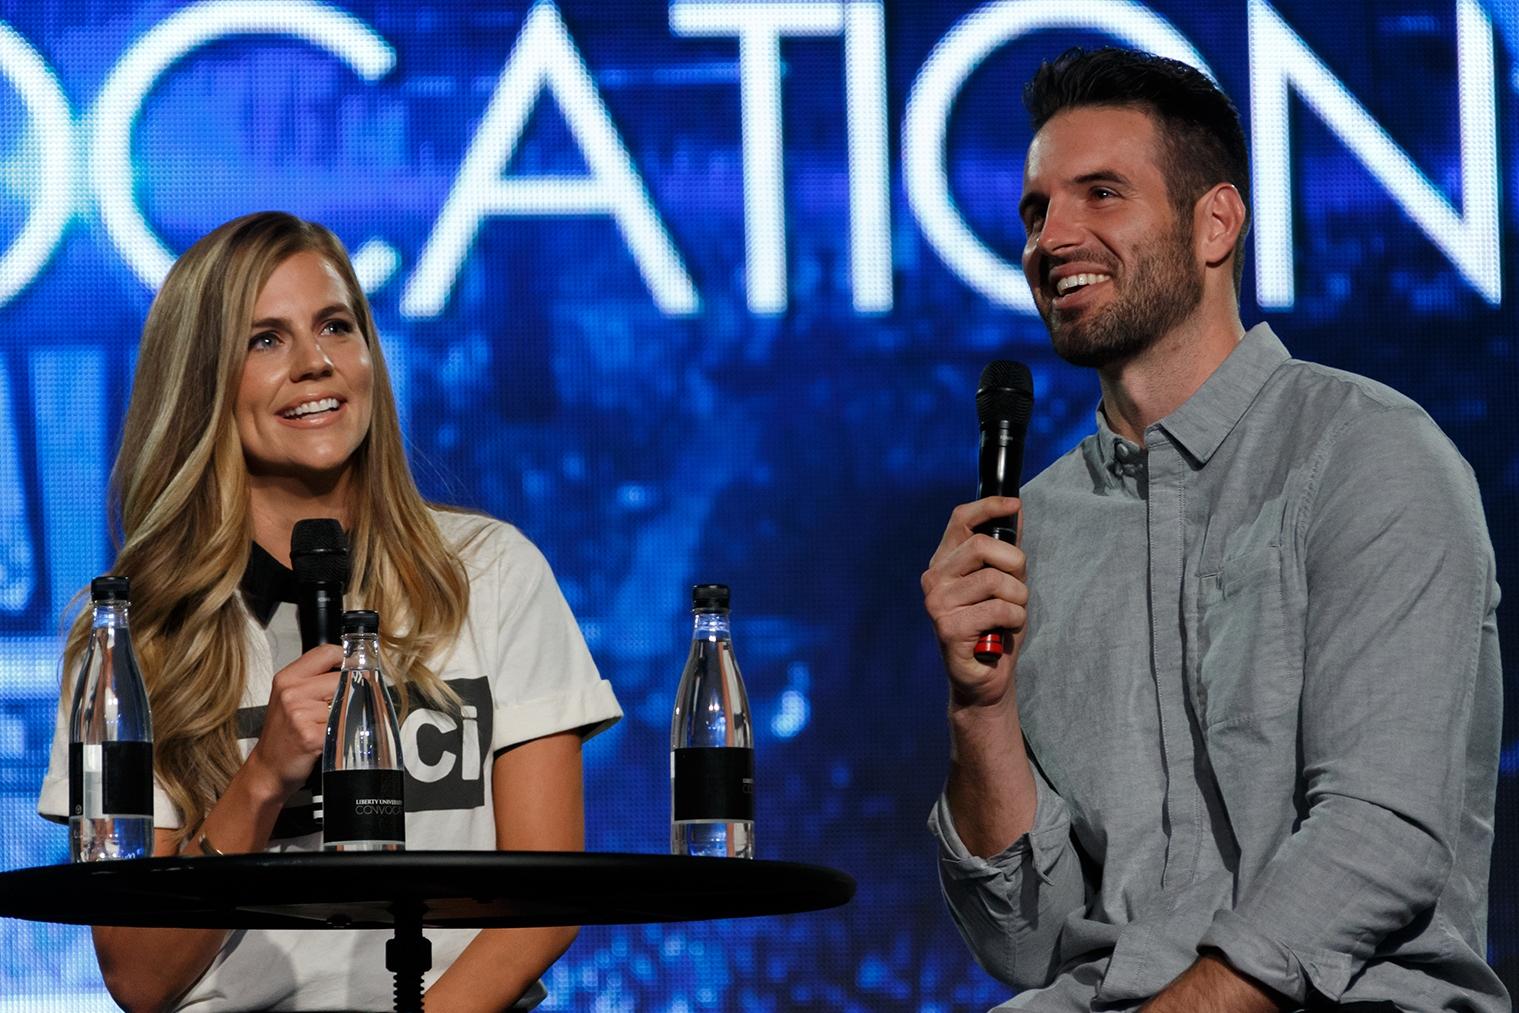 Sports personalities Sam and Christian Ponder toss out life wisdom in Convo...